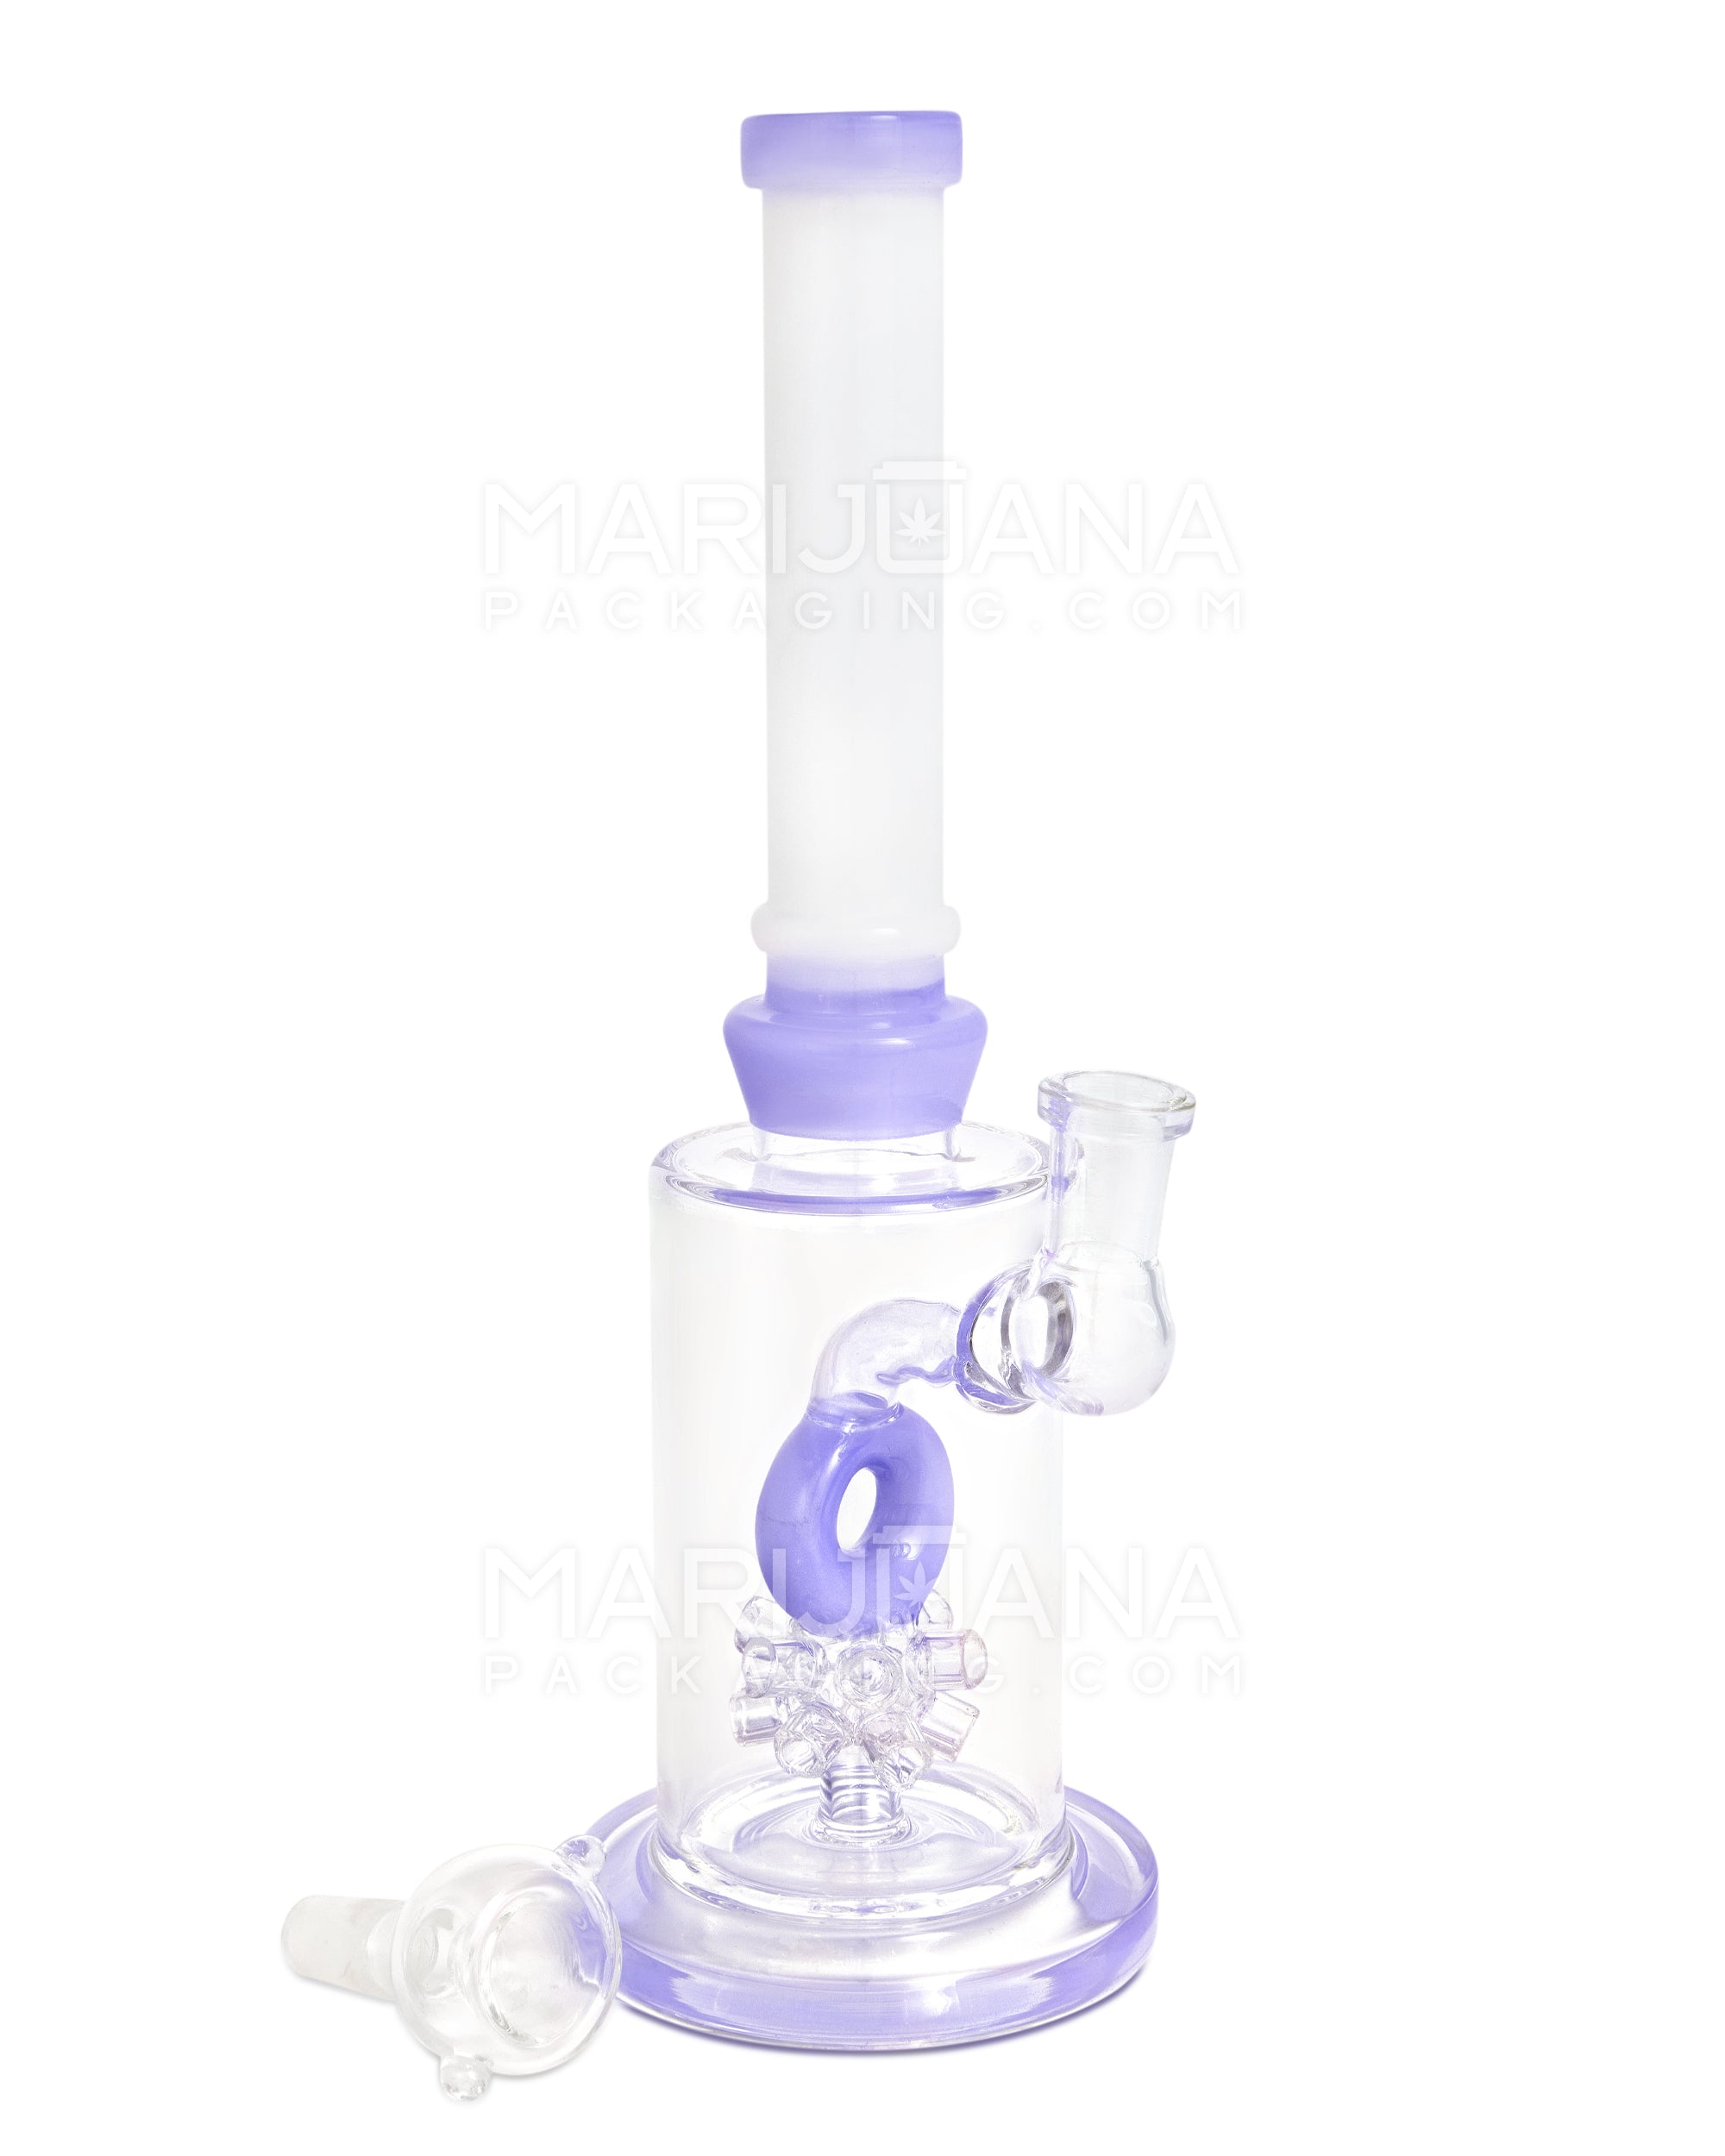 Straight Neck Atomic Donut Perc Glass Water Pipe w/ Thick Base | 10.5in Tall - 14mm Bowl - Milky Purple - 2